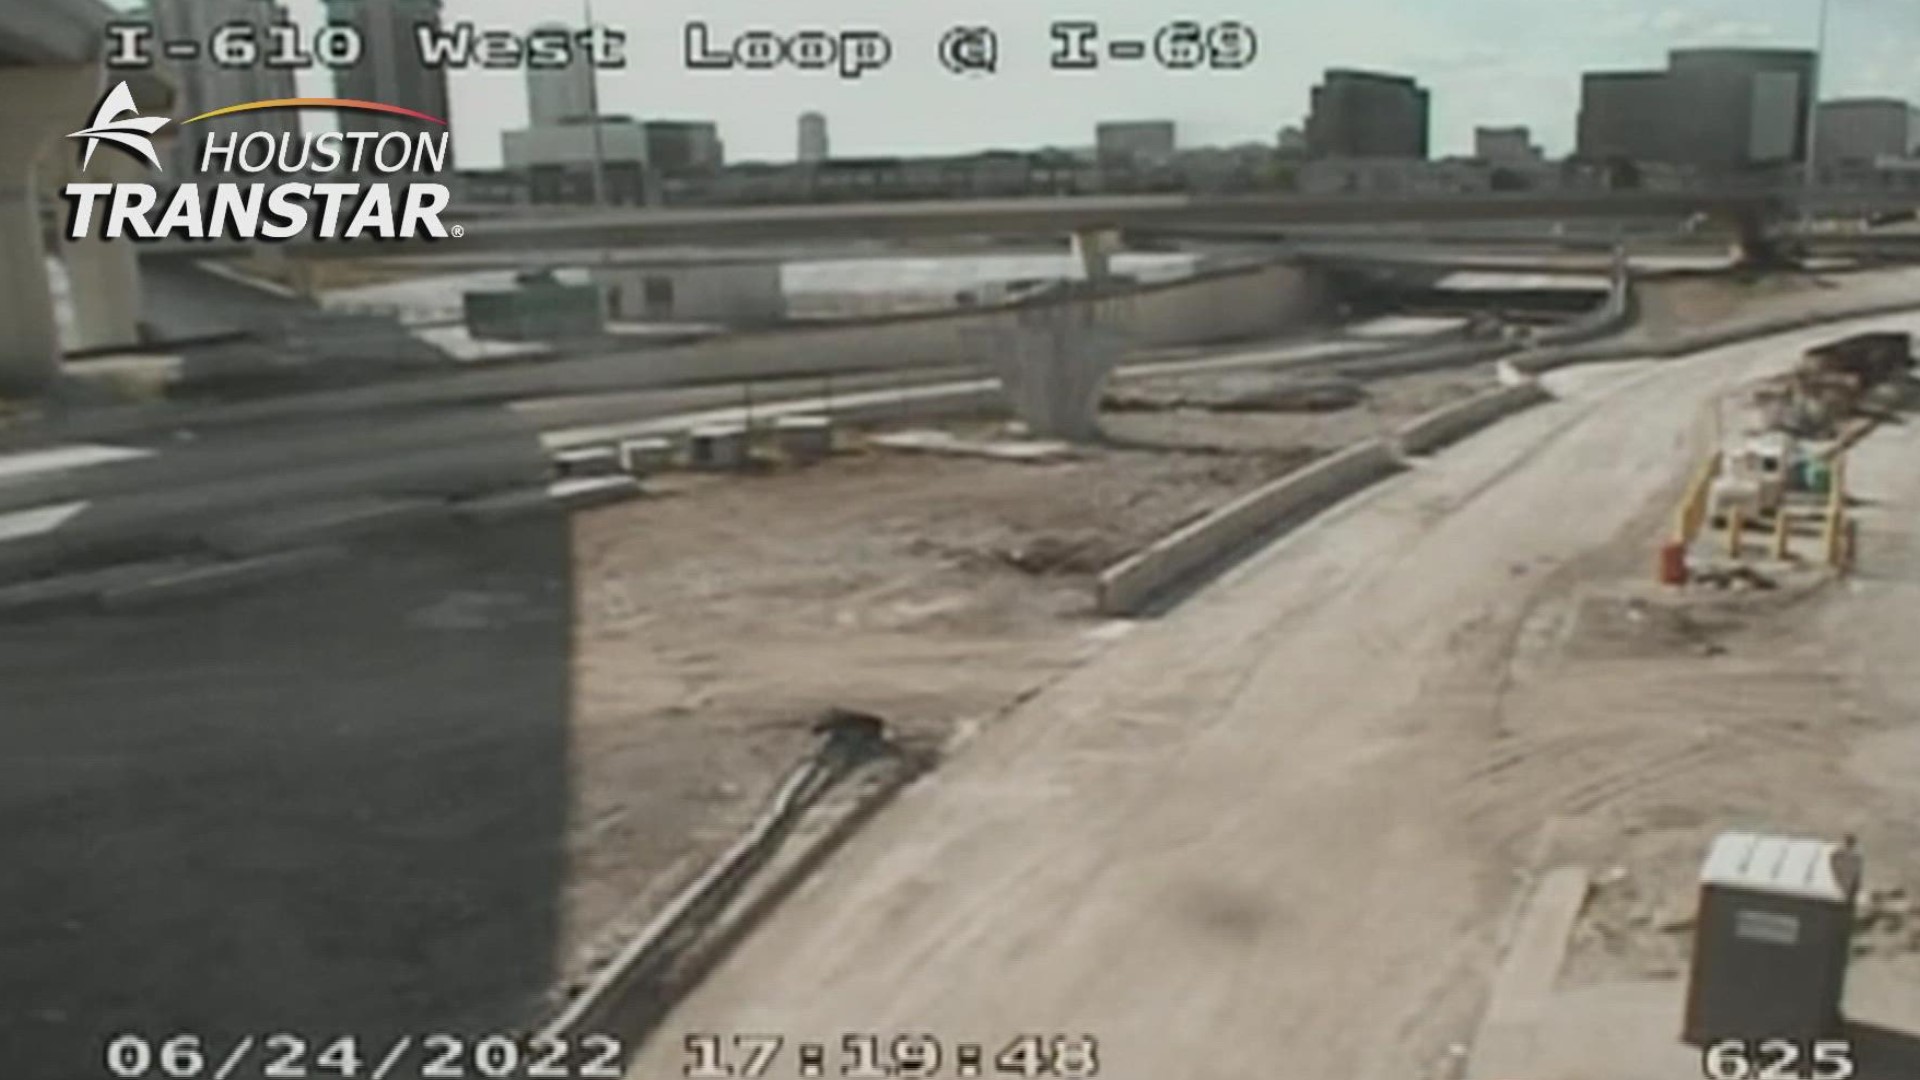 The I-69 Southwest Freeway at 610 West Loop will be closed in both directions this weekend. Several ramps near this construction area will also be closed.